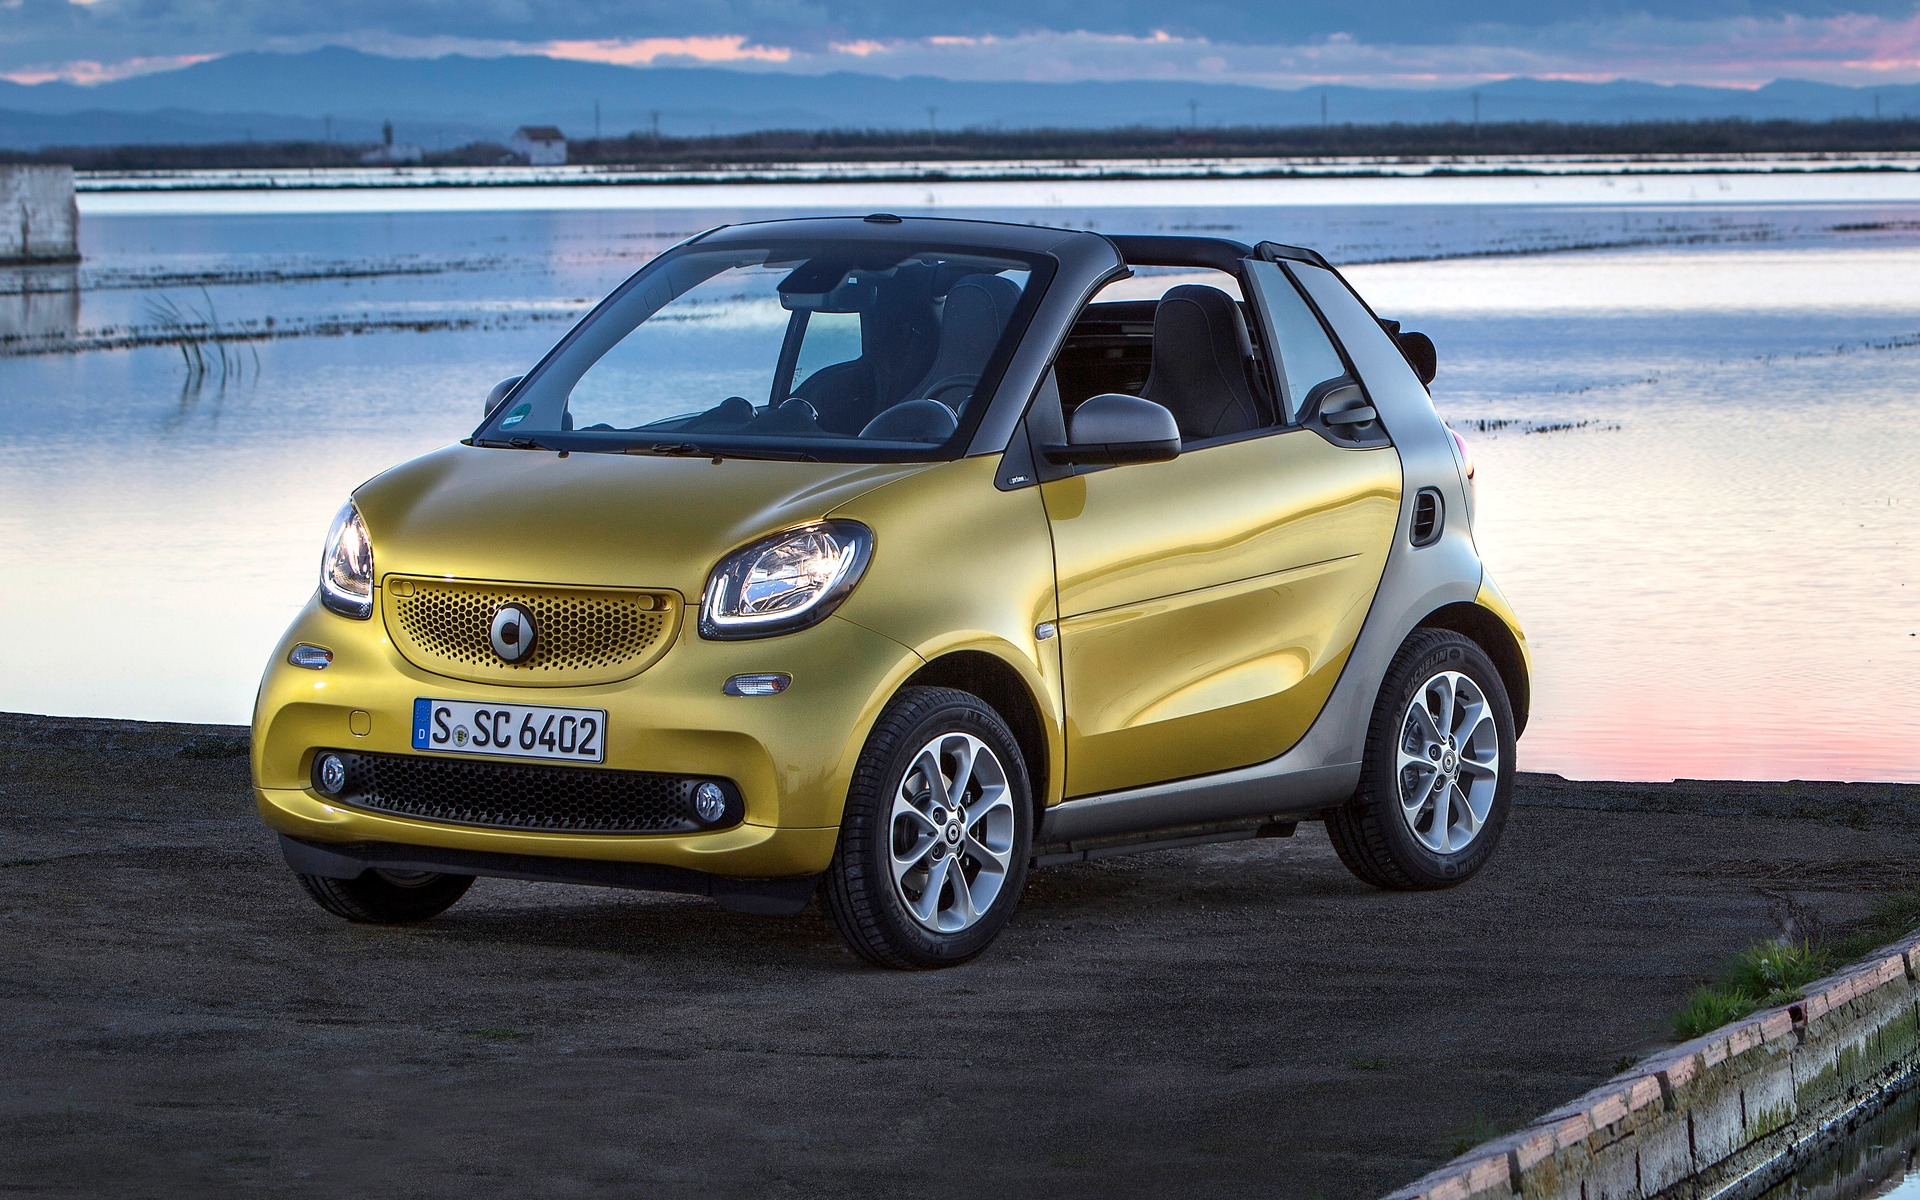 2018 smart fortwo News, reviews, picture galleries and videos The